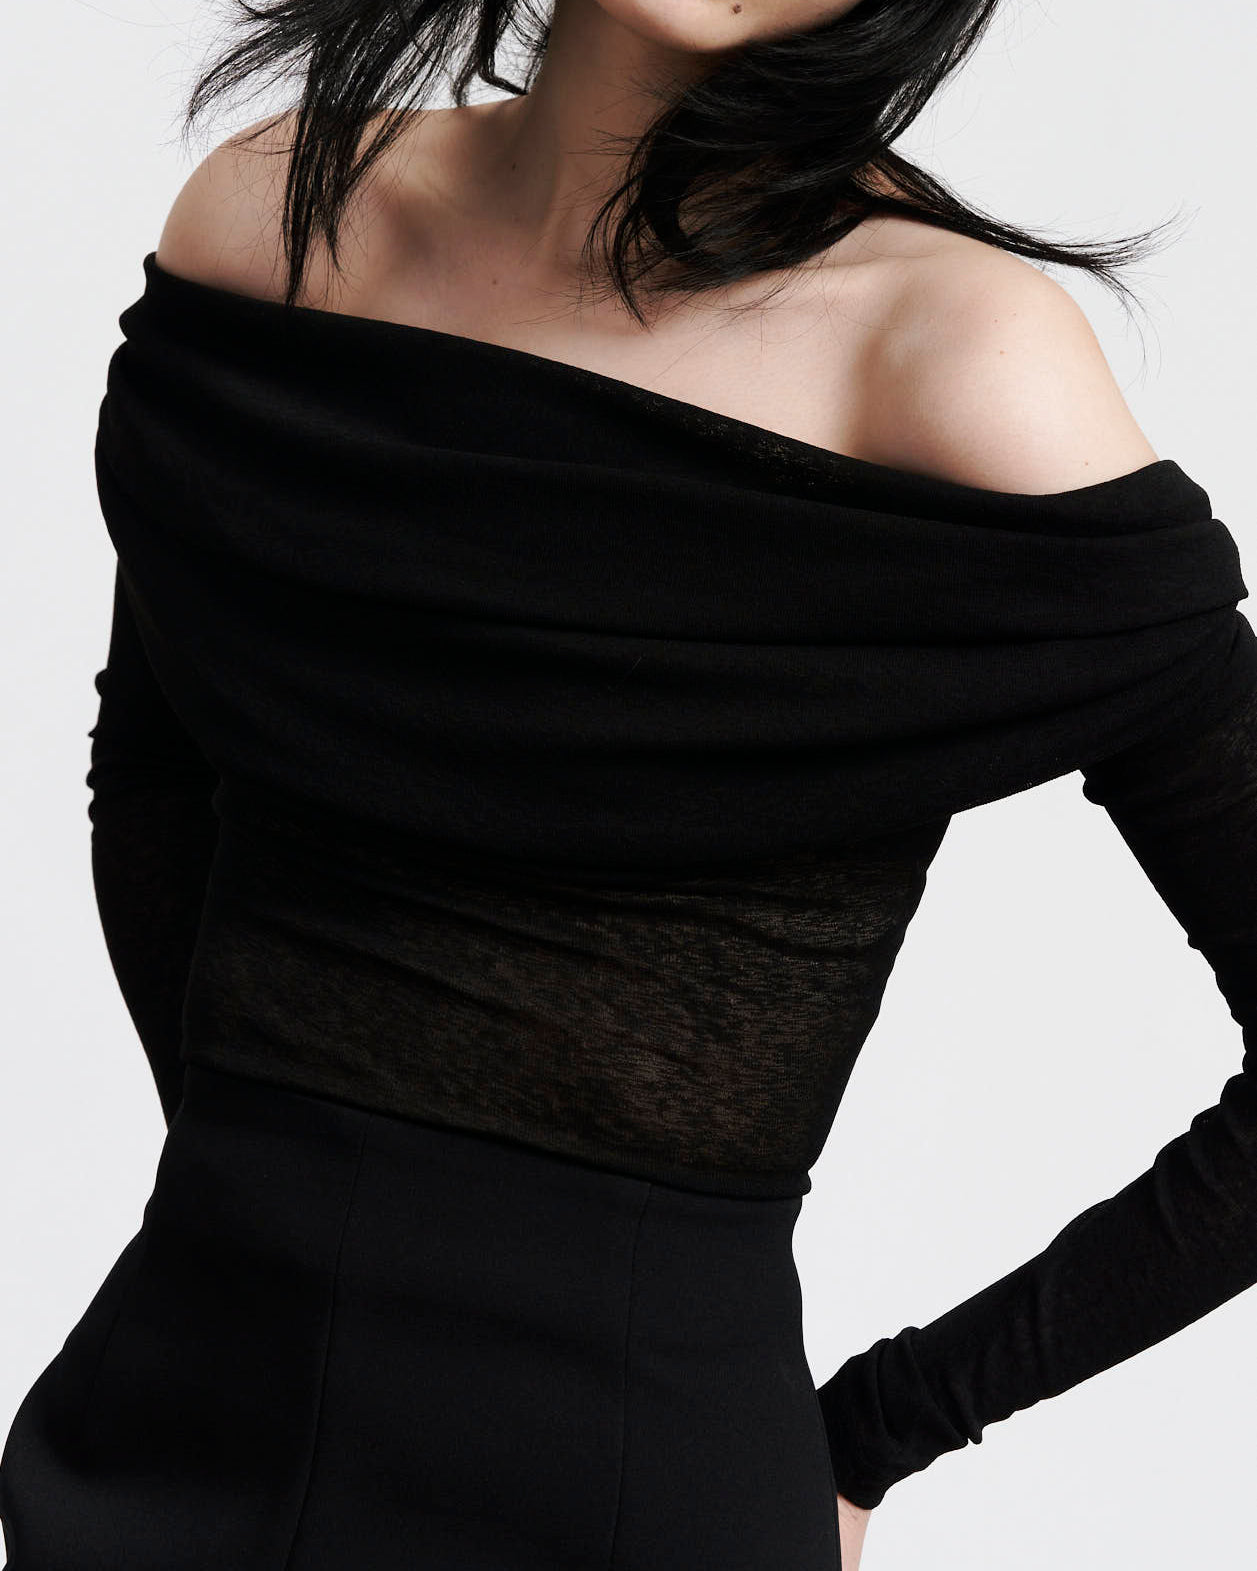 tight detailed mage of The Ada Top, a Black semi sheer, rouched off the shoulder top on women with dark hair and hands gently placed behind her back 